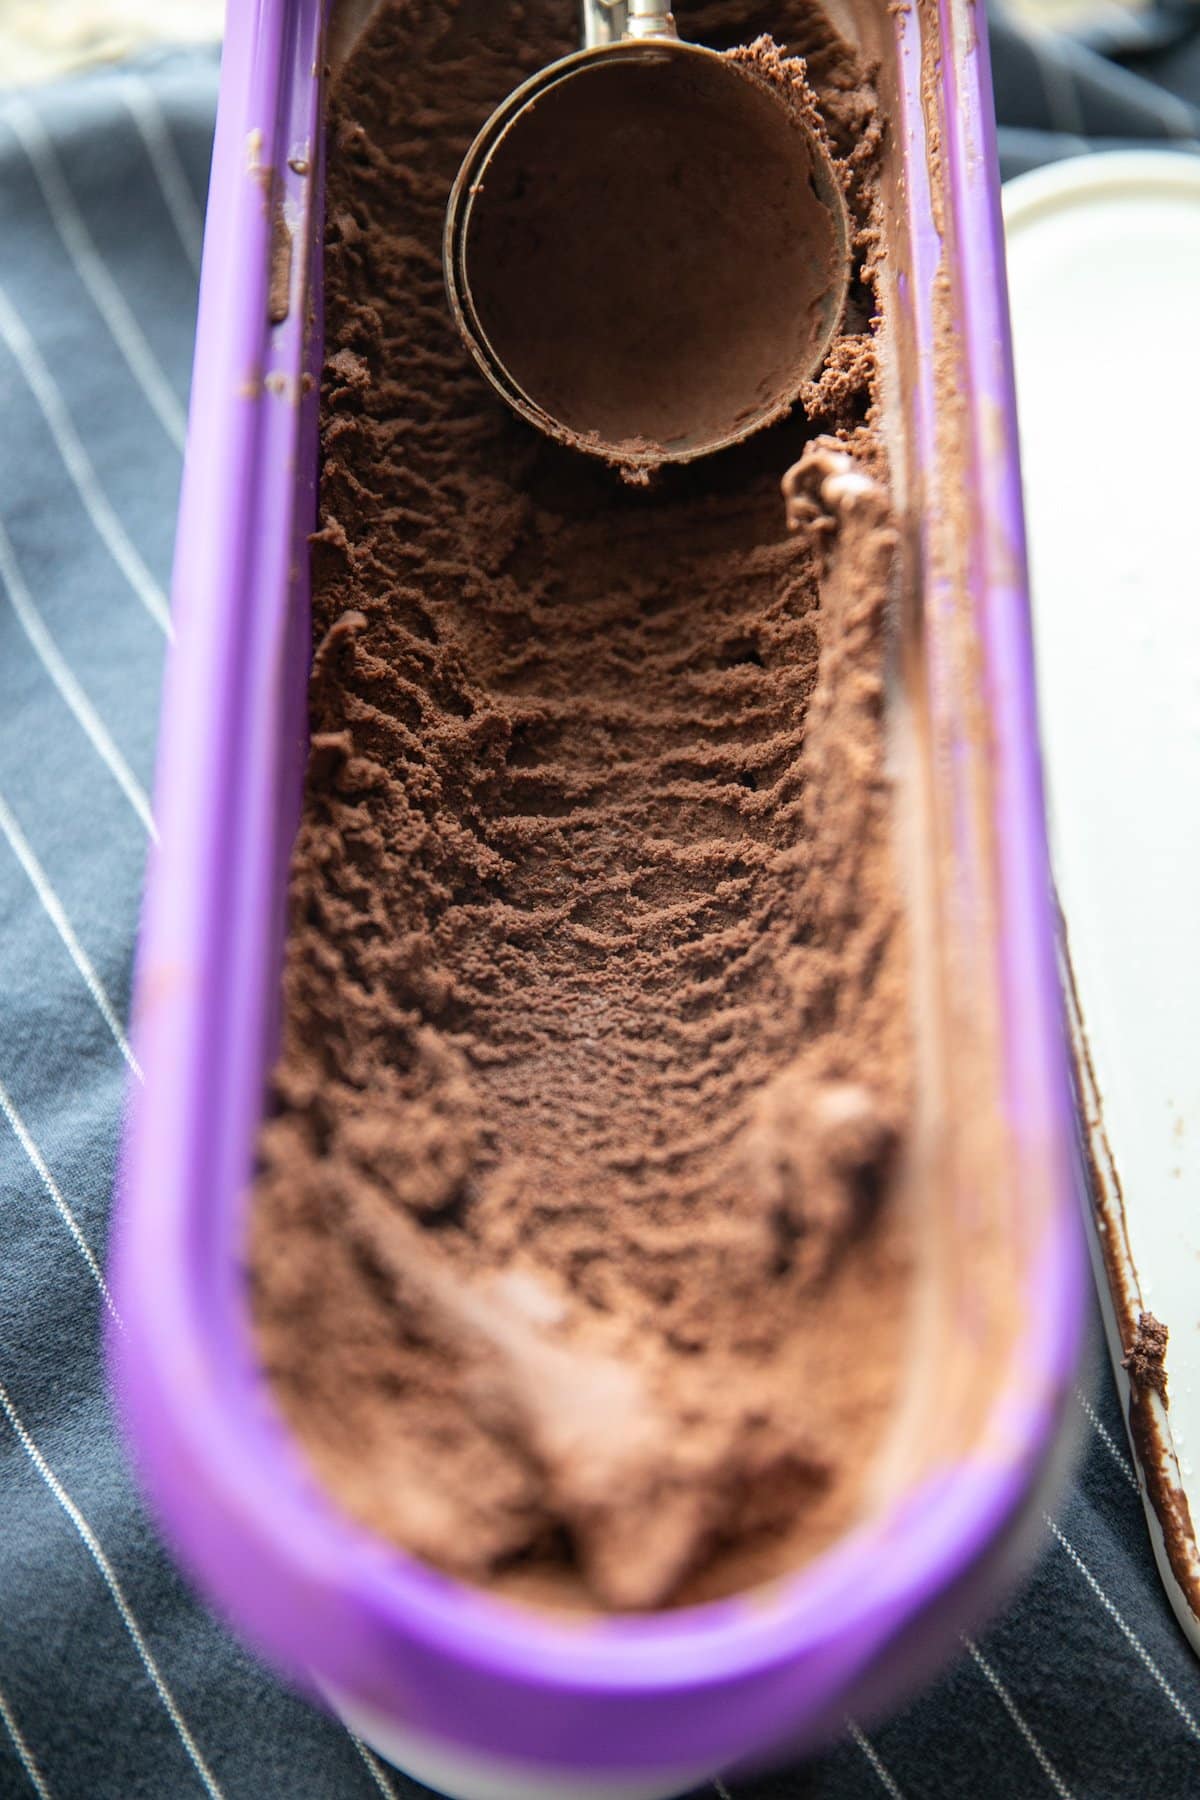 scooping chocolate ice cream out of purple container